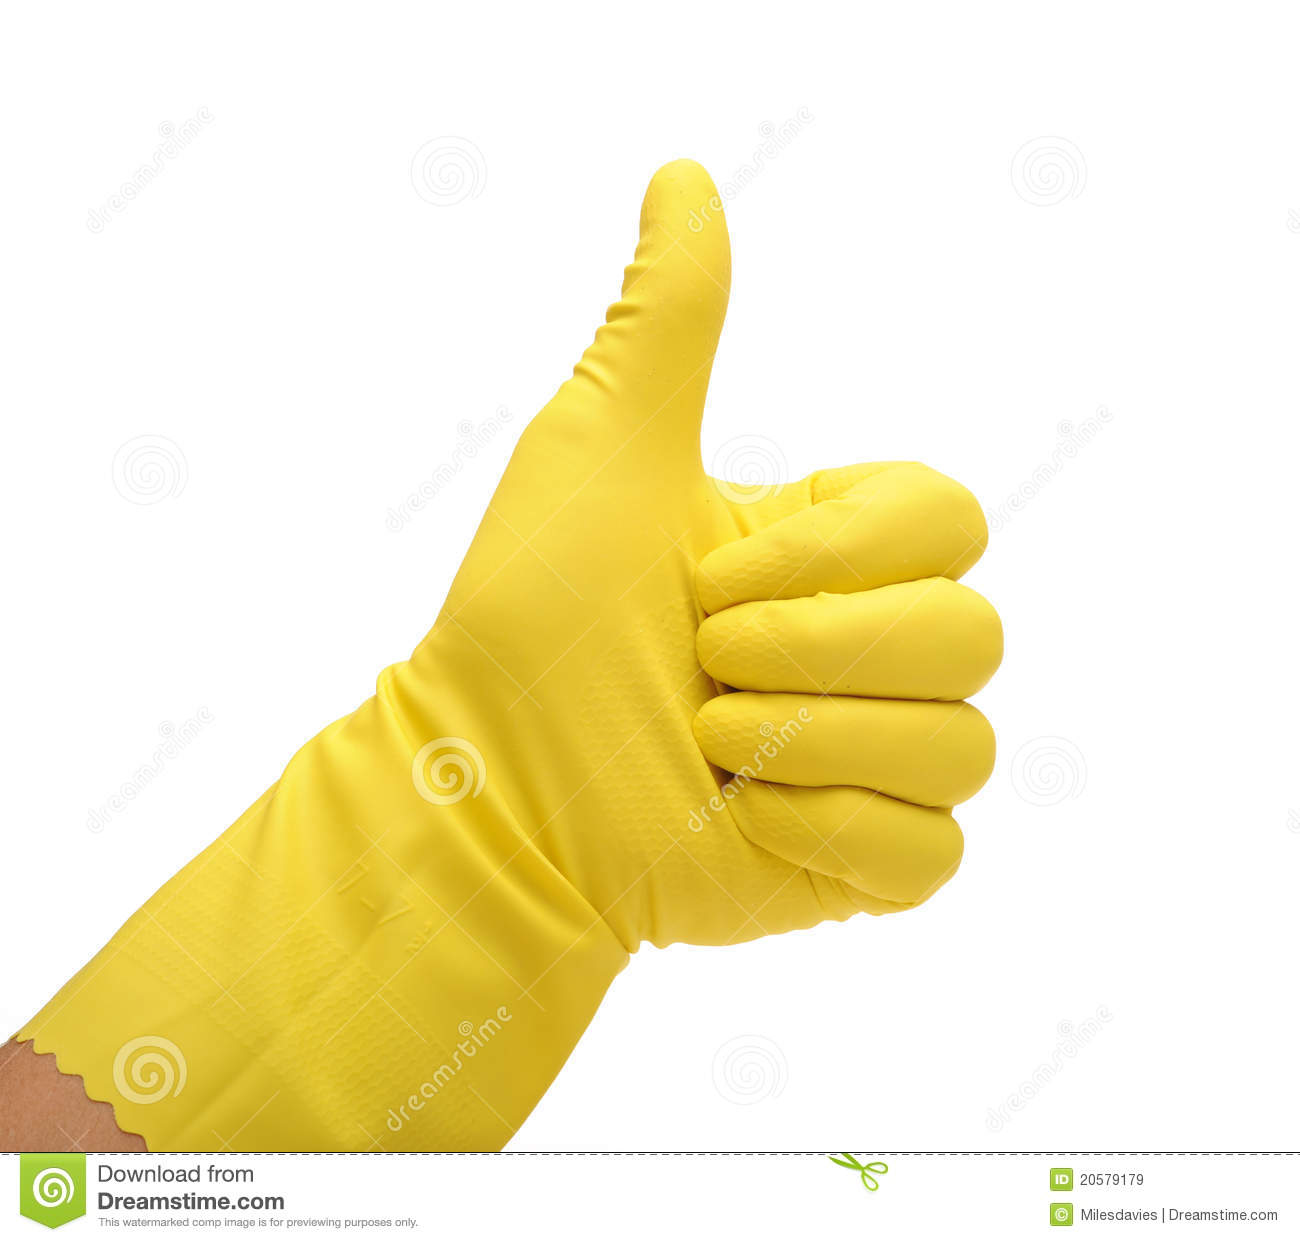 Clipart Rubber Gloves Rubber Glove Thumbs Up